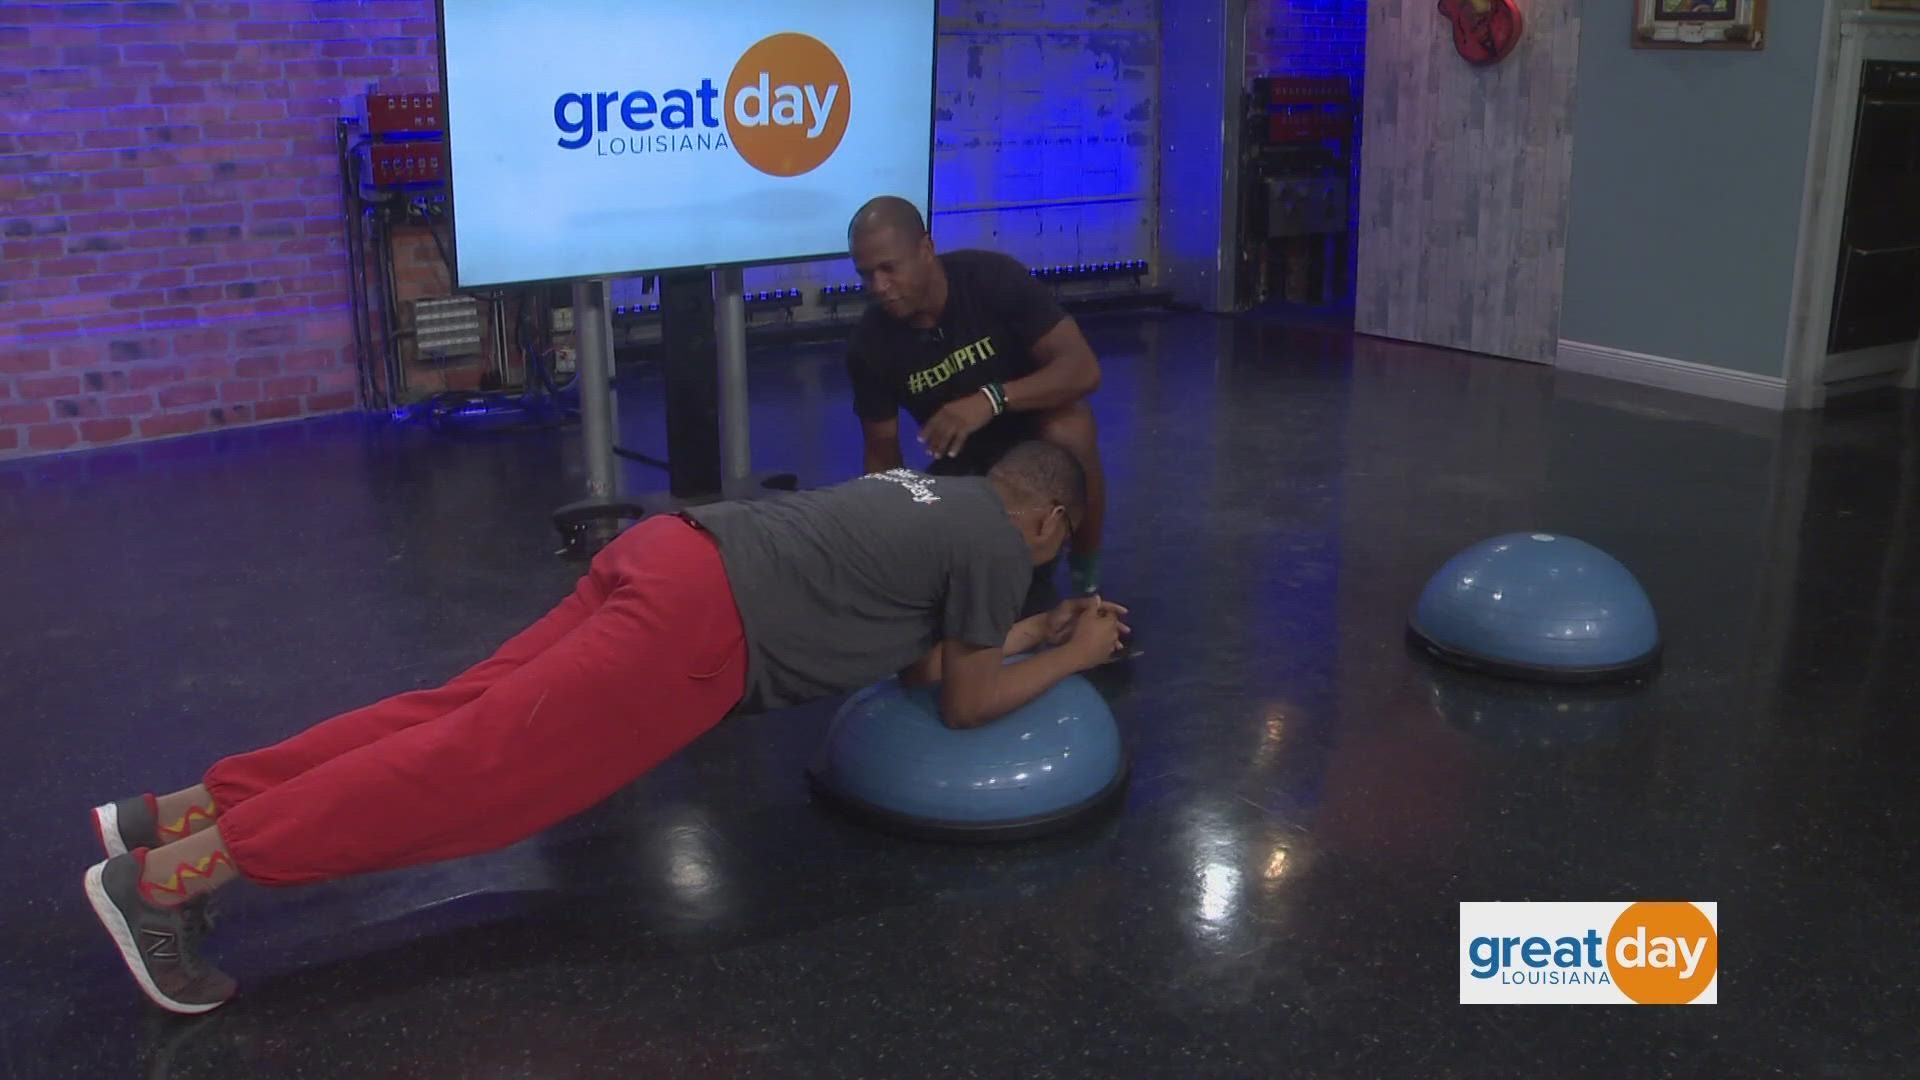 JP from Equip Fitness shows us how to use a Bosu Ball for your next workout to help increase core strength and stability.